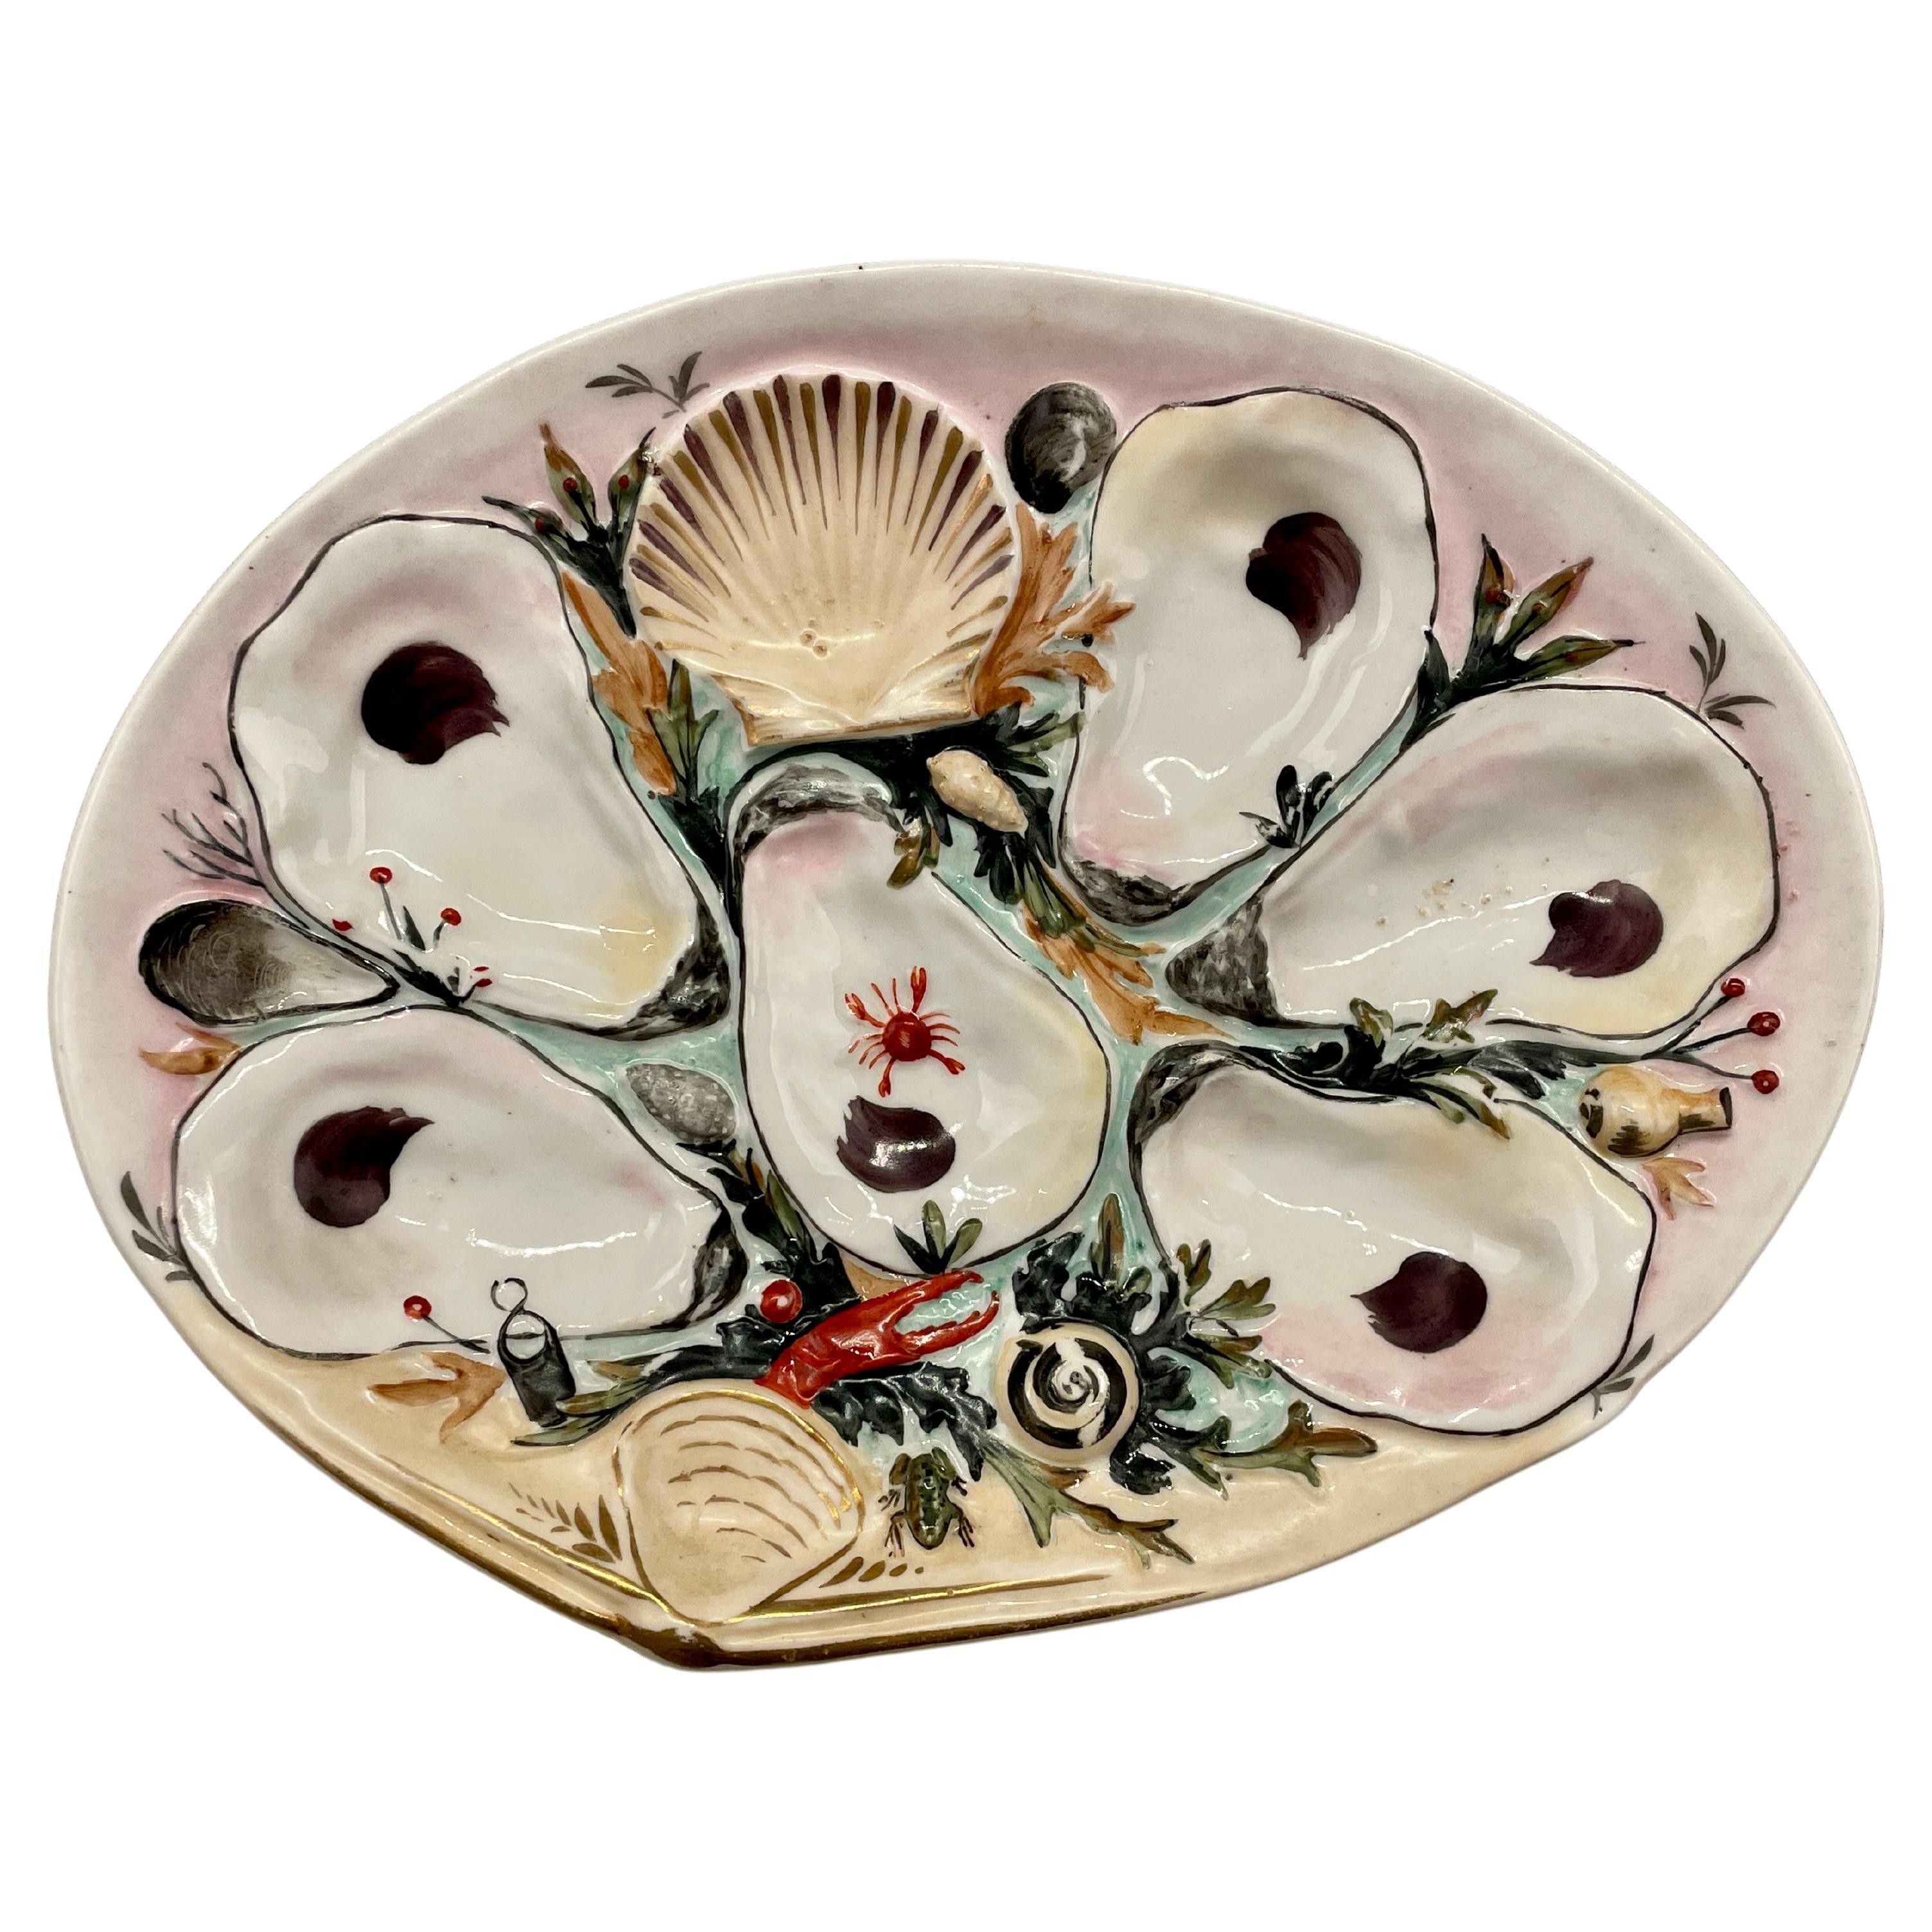 19th c. Porcelain Oyster Plate from Union, NY